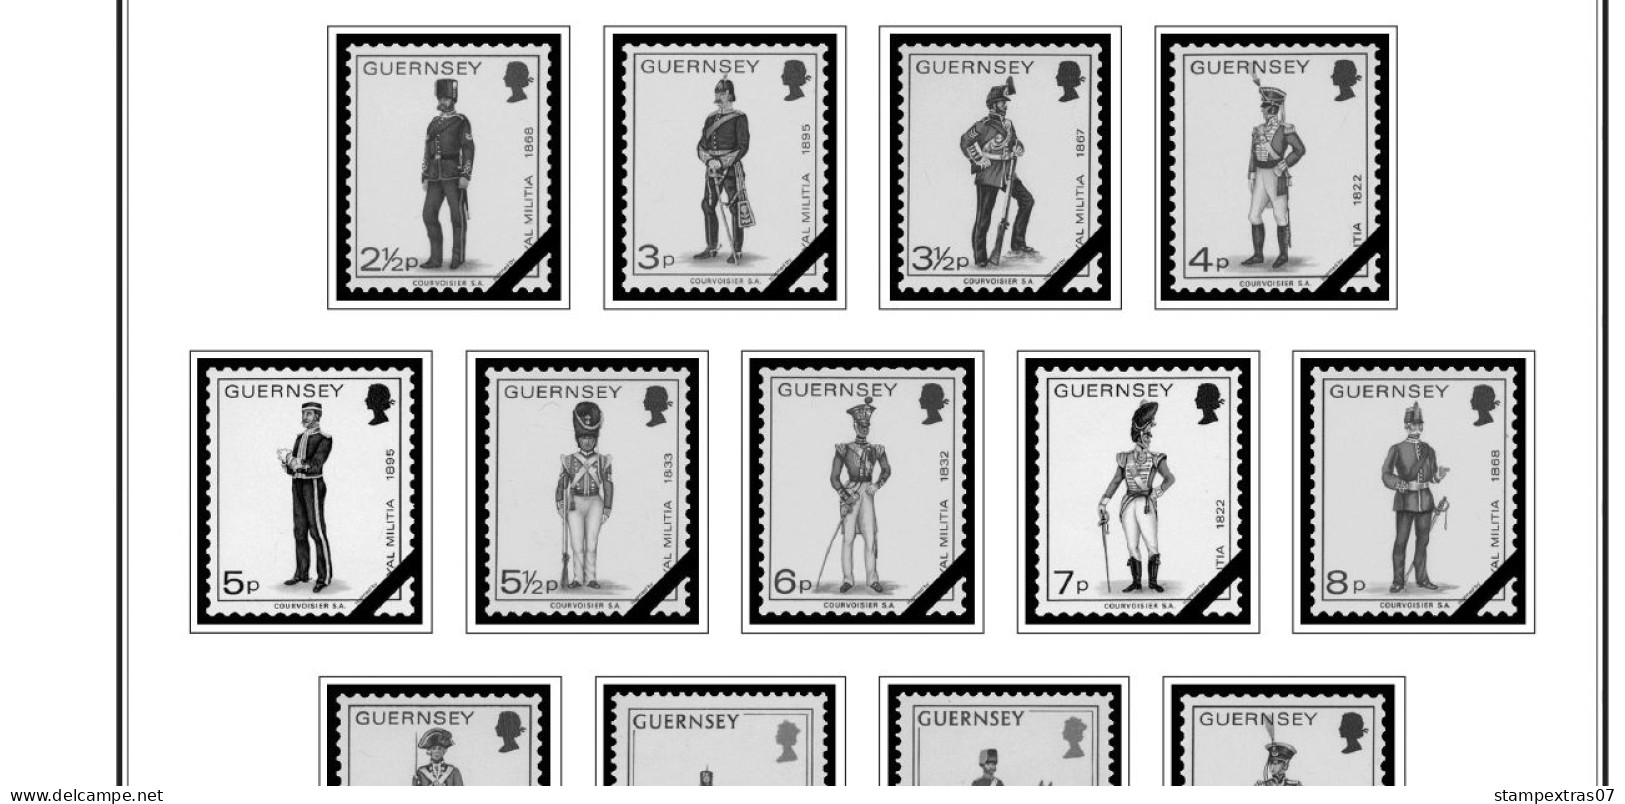 GB GUERNSEY 1958-2010 + 2011- 2020 STAMP ALBUM PAGES (212 B&w Illustrated Pages) - Inglés